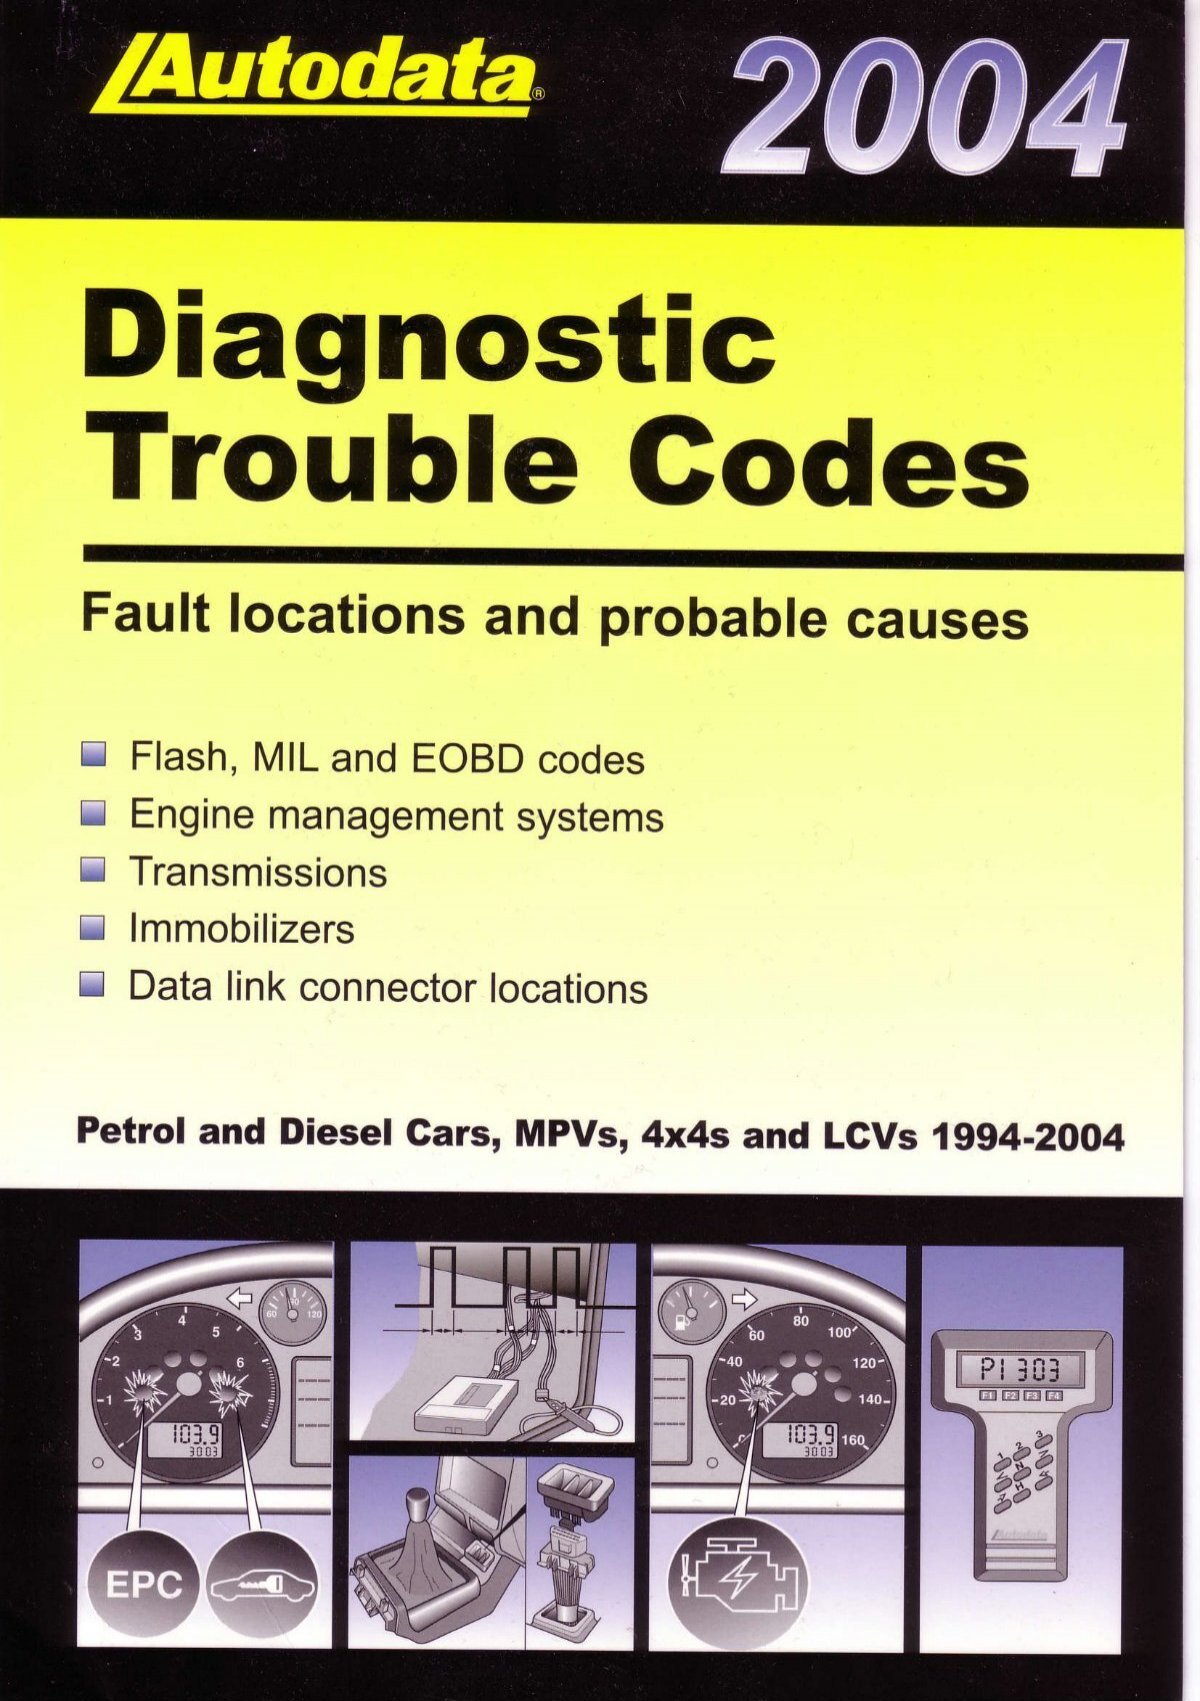 Diagnostic Trouble Codes Fault Locations And Probable Causes Flash Mil And Eobd Codes Engine Management Systems Transmissions Immobilizers Data Diesel Cars Mpvs 4X4s And